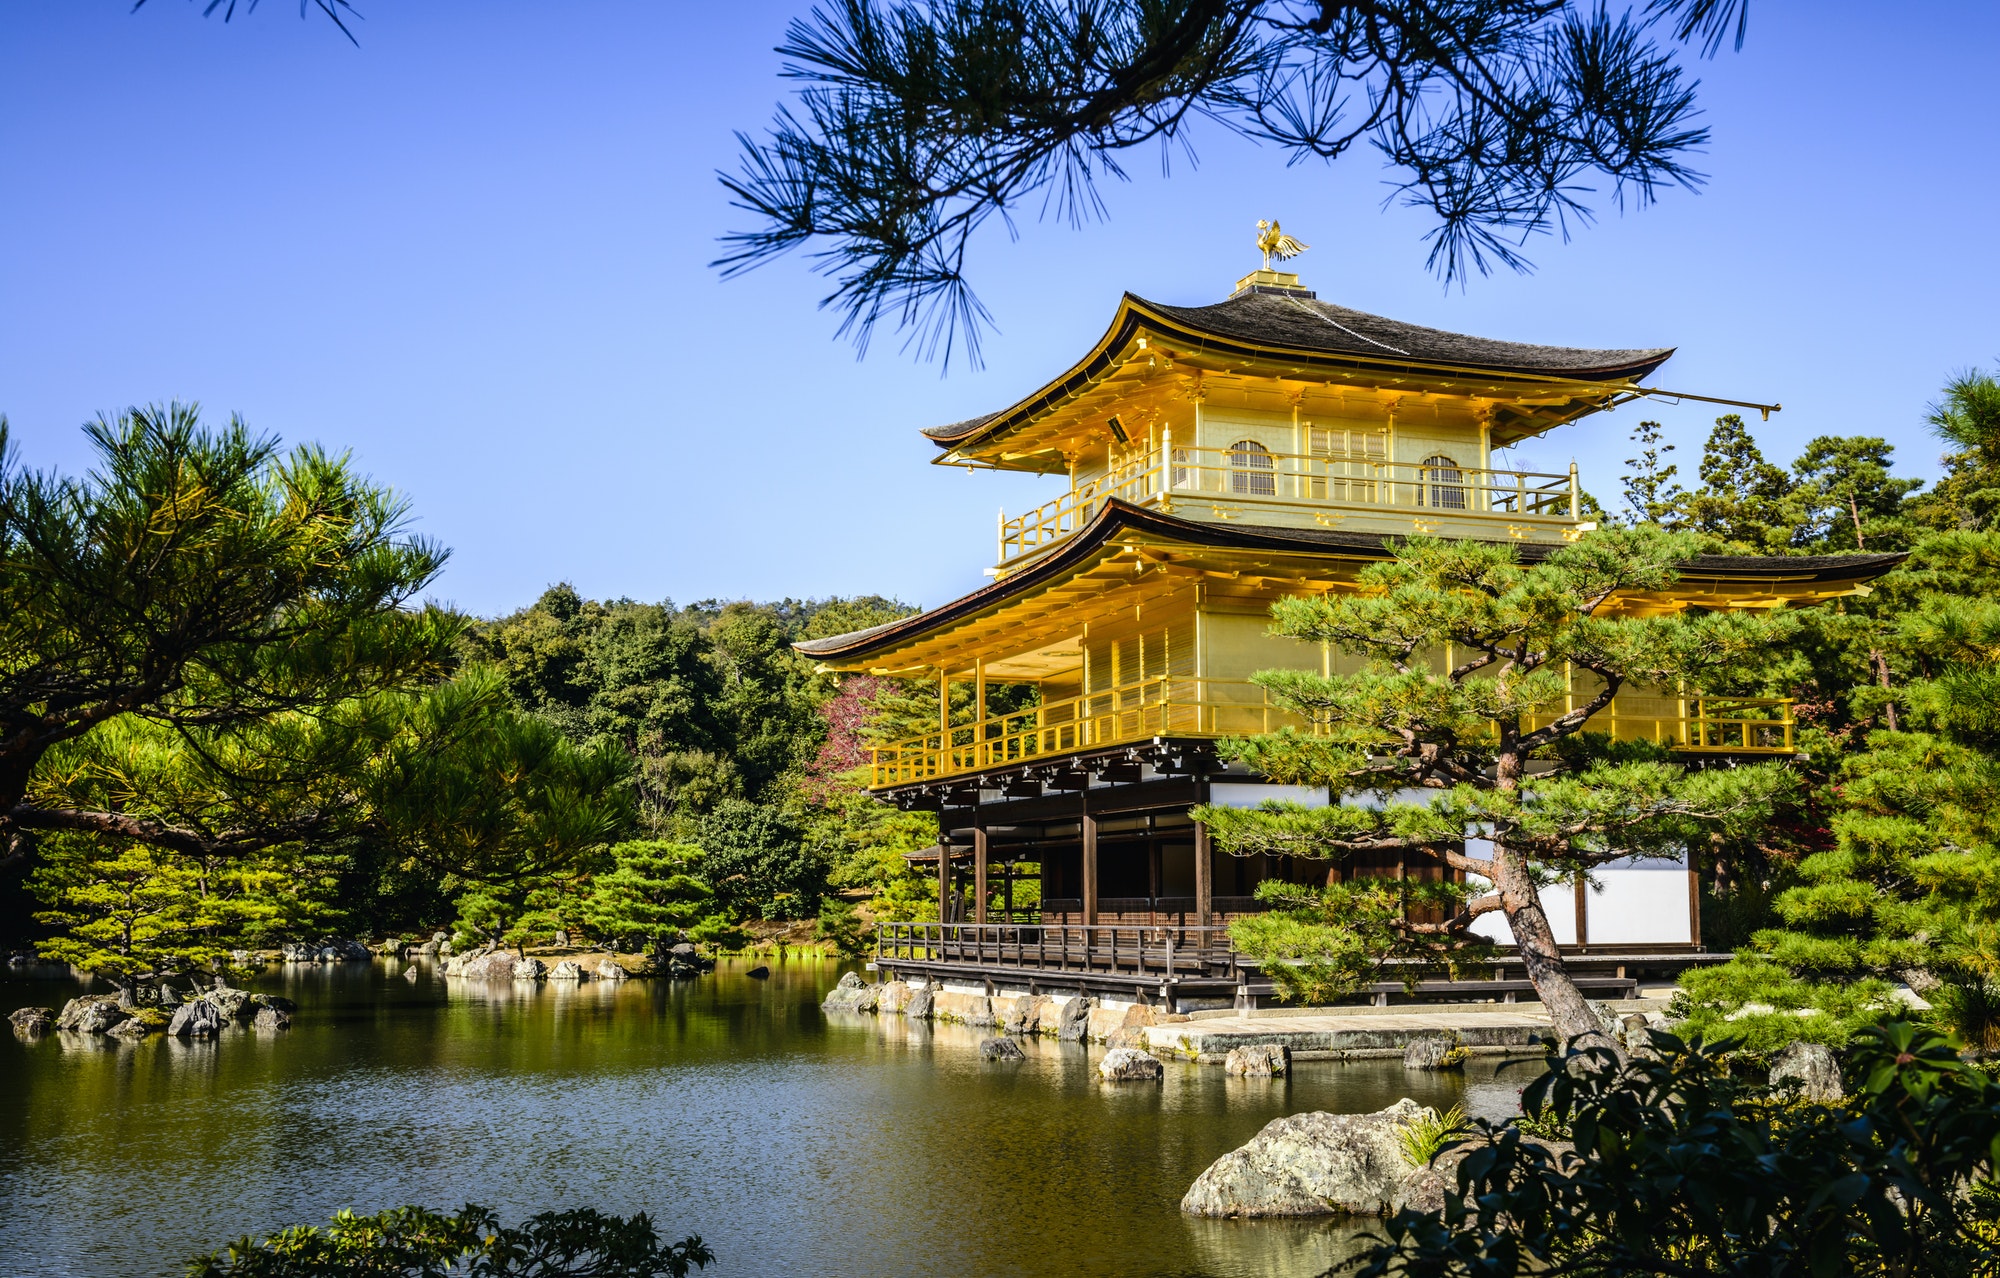 Gold Temple over still lake, Kyoto, Japan